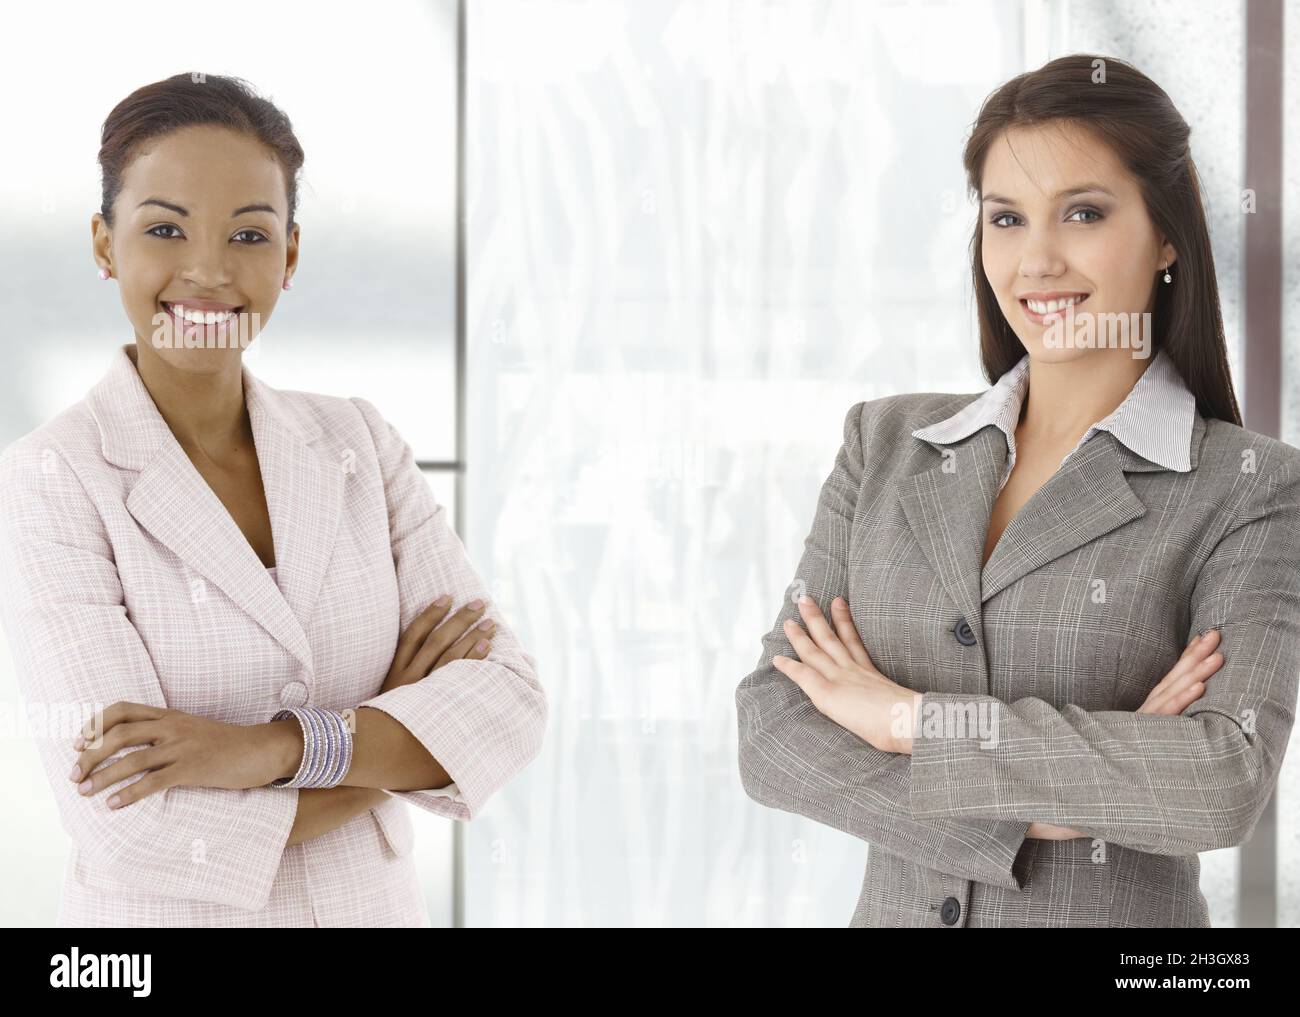 Portrait of happy young businesswomen in office Stock Photo